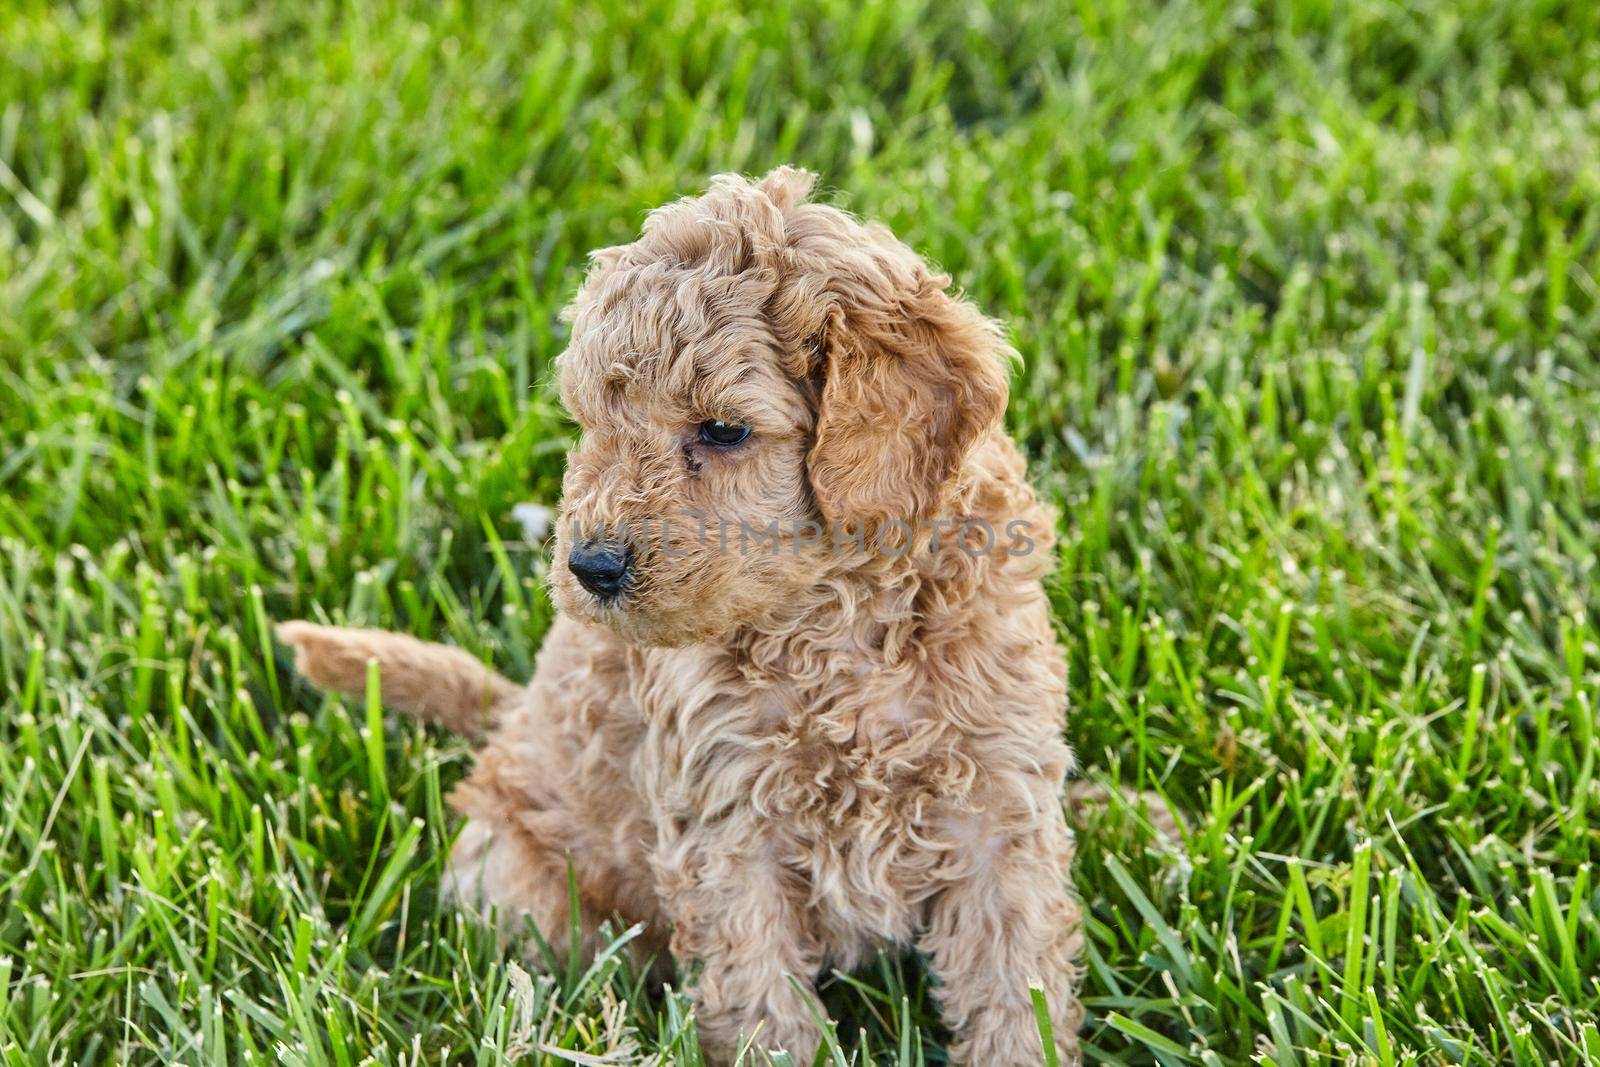 Image of Cute Goldendoodle puppy sitting in grass